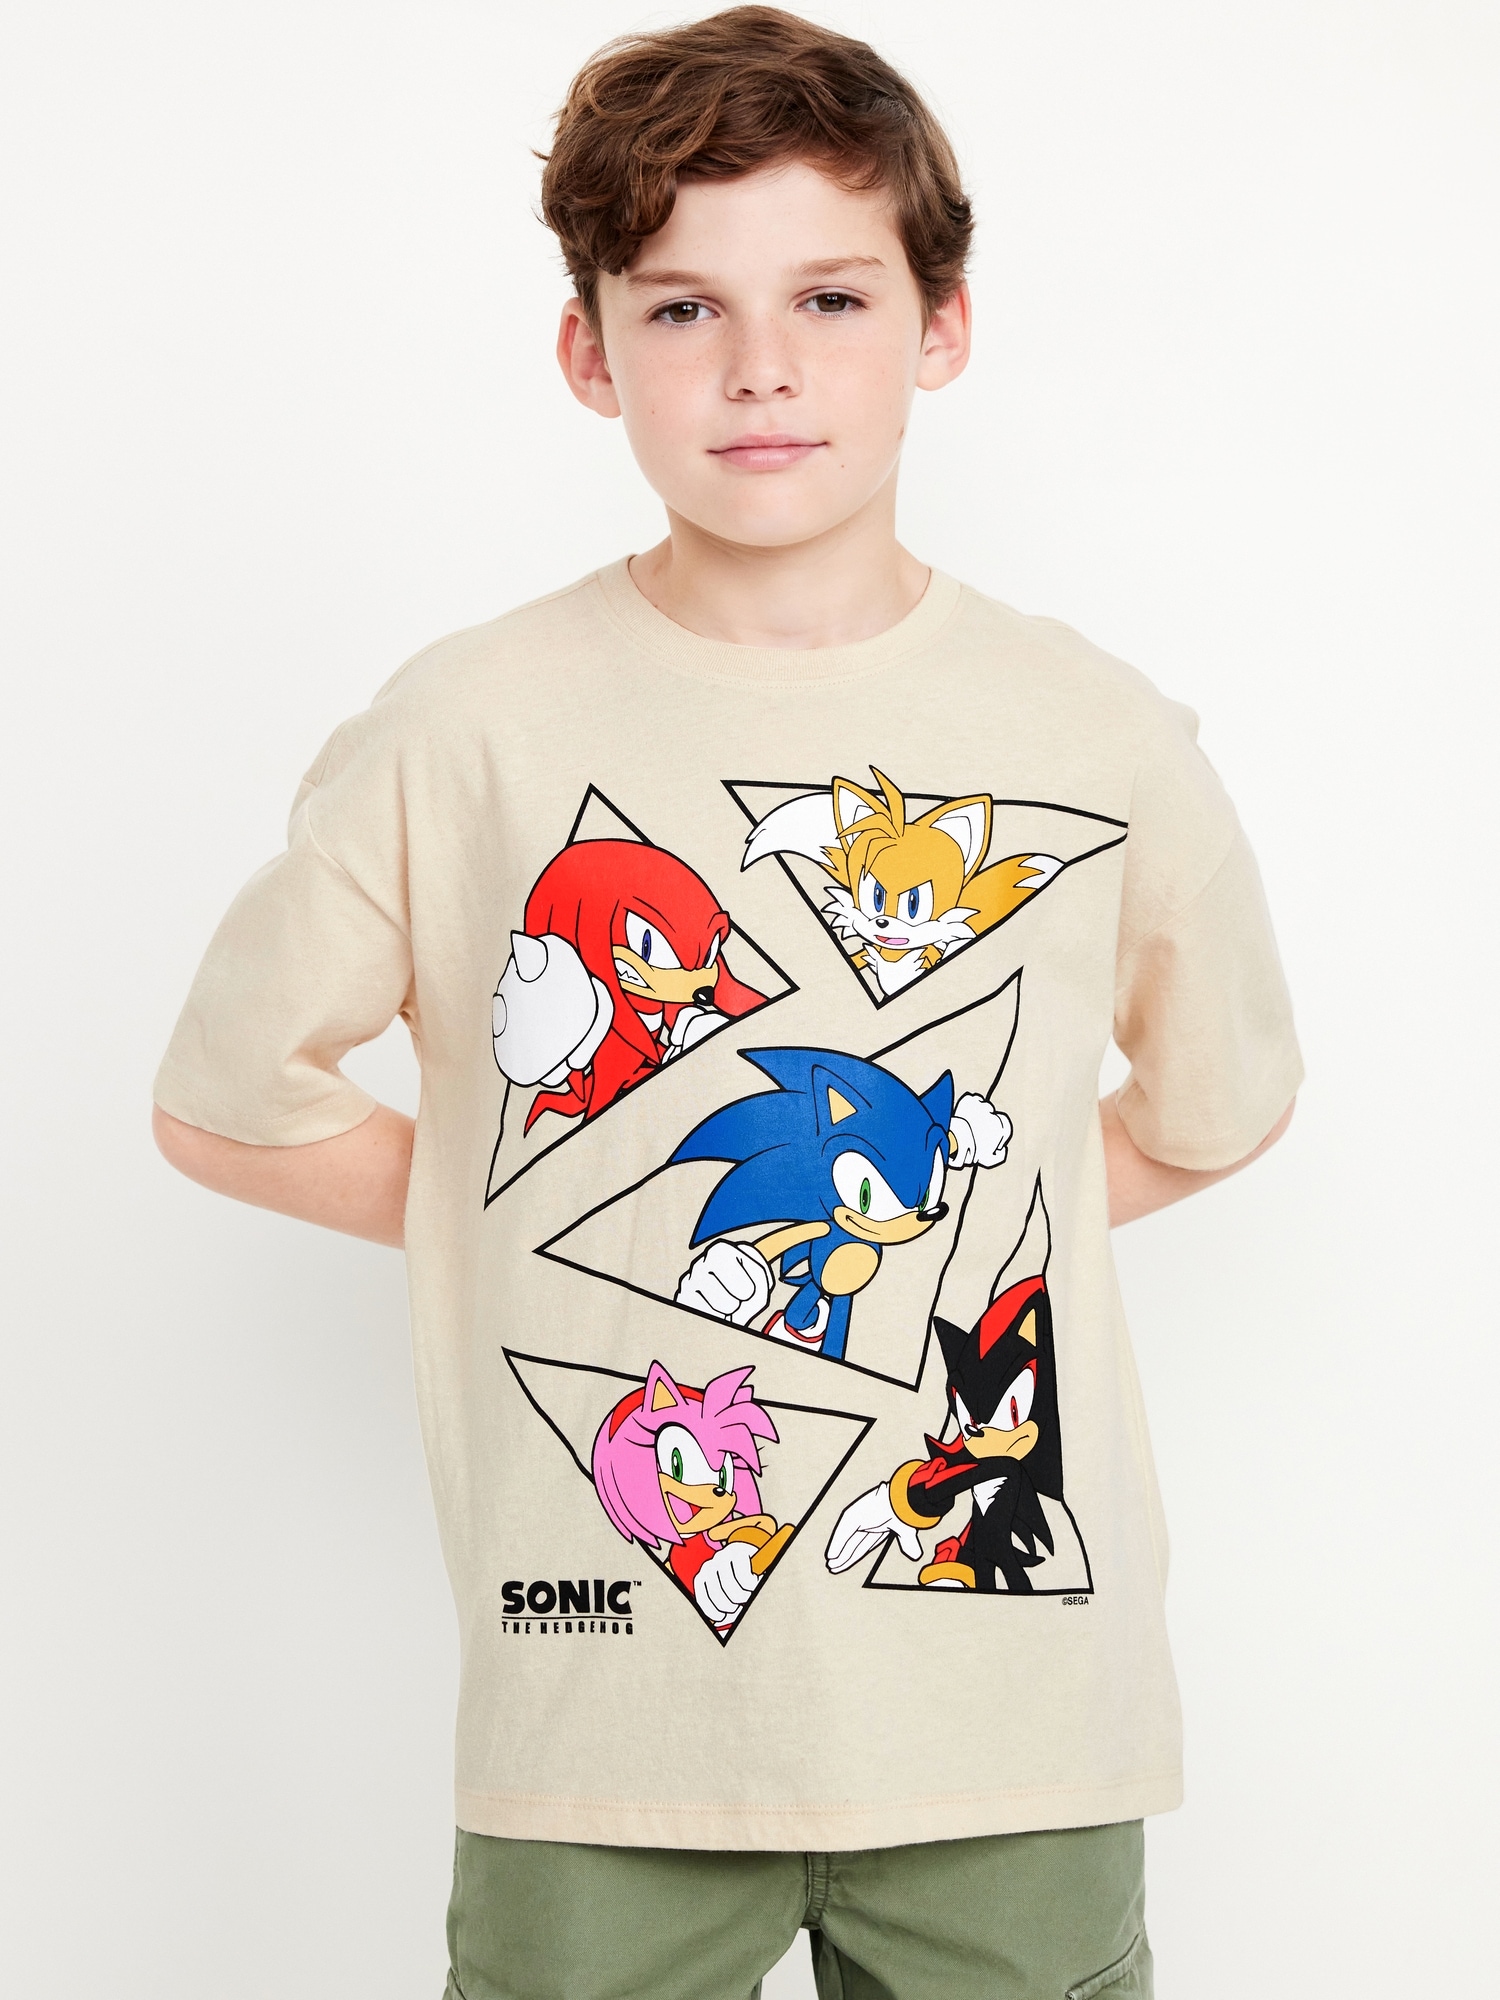 Sonic The Hedgehog Oversized Gender-Neutral Graphic T-Shirt for Kids